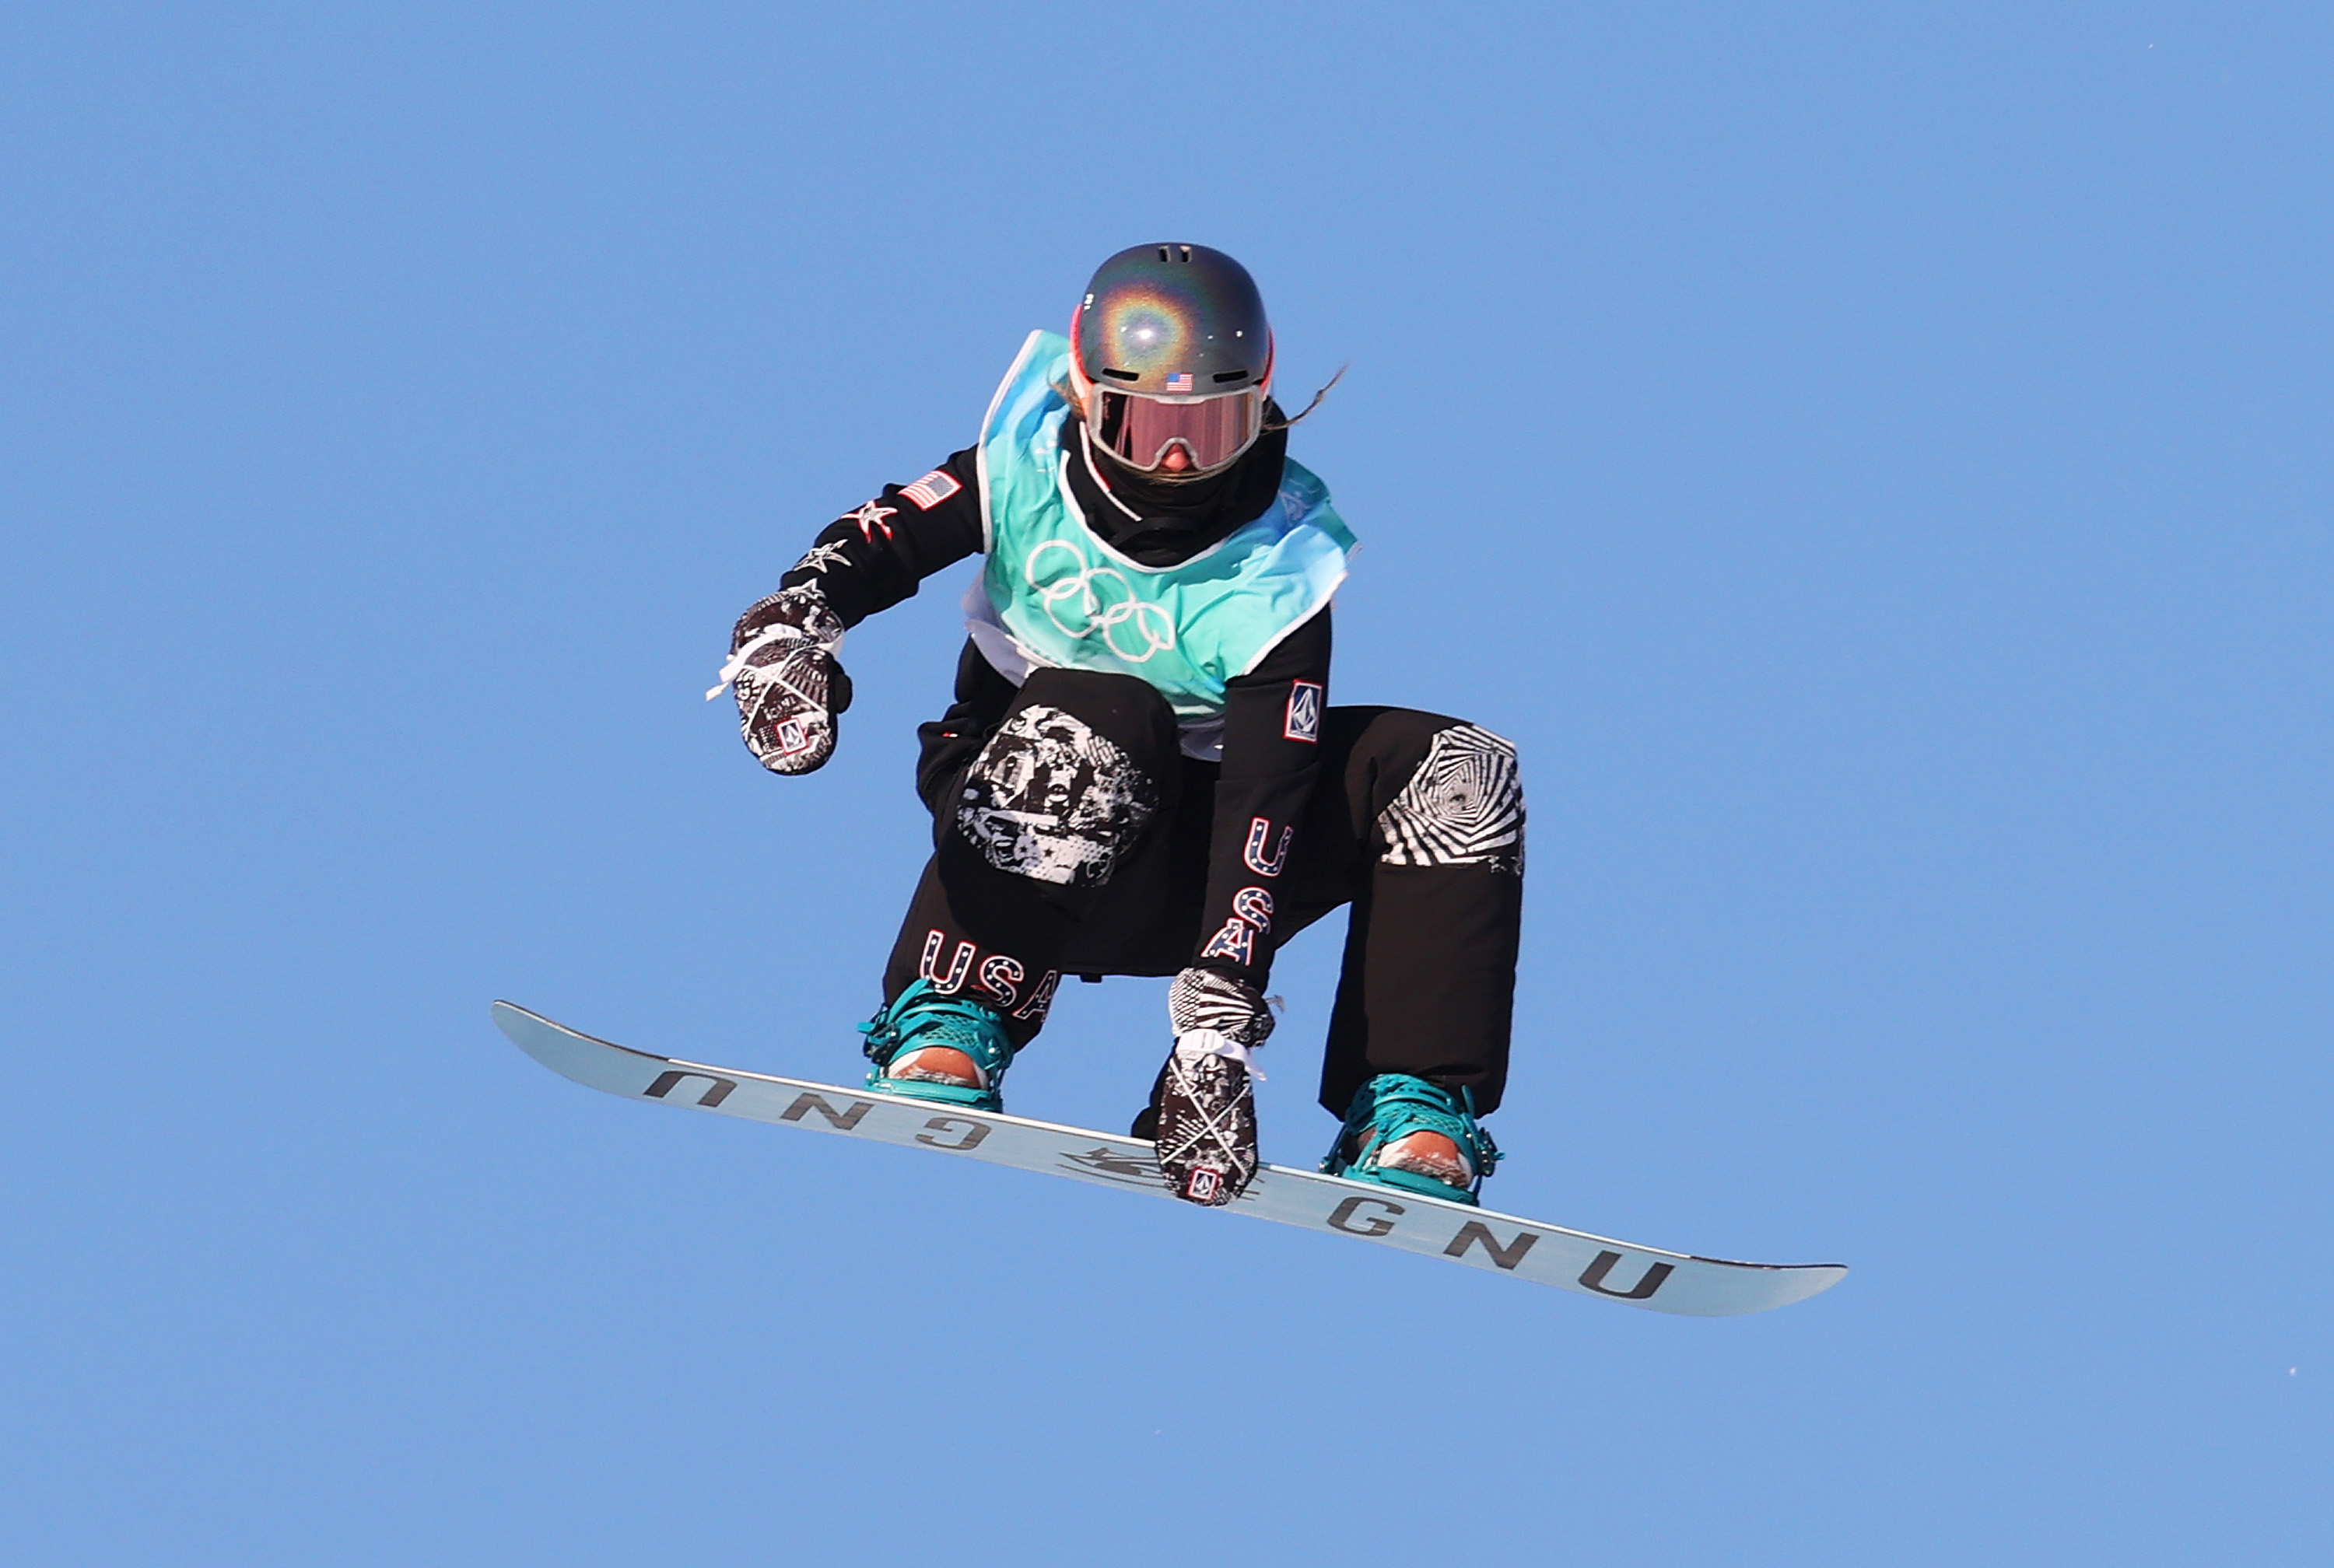 Jamie Anderson of Team United States performs a trick on a practice run ahead of the Women’s Snowboard Big Air Qualification on Day 10 of the Beijing 2022 Winter Olympics at Big Air Shougang on February 14, 2022 in Beijing, China.